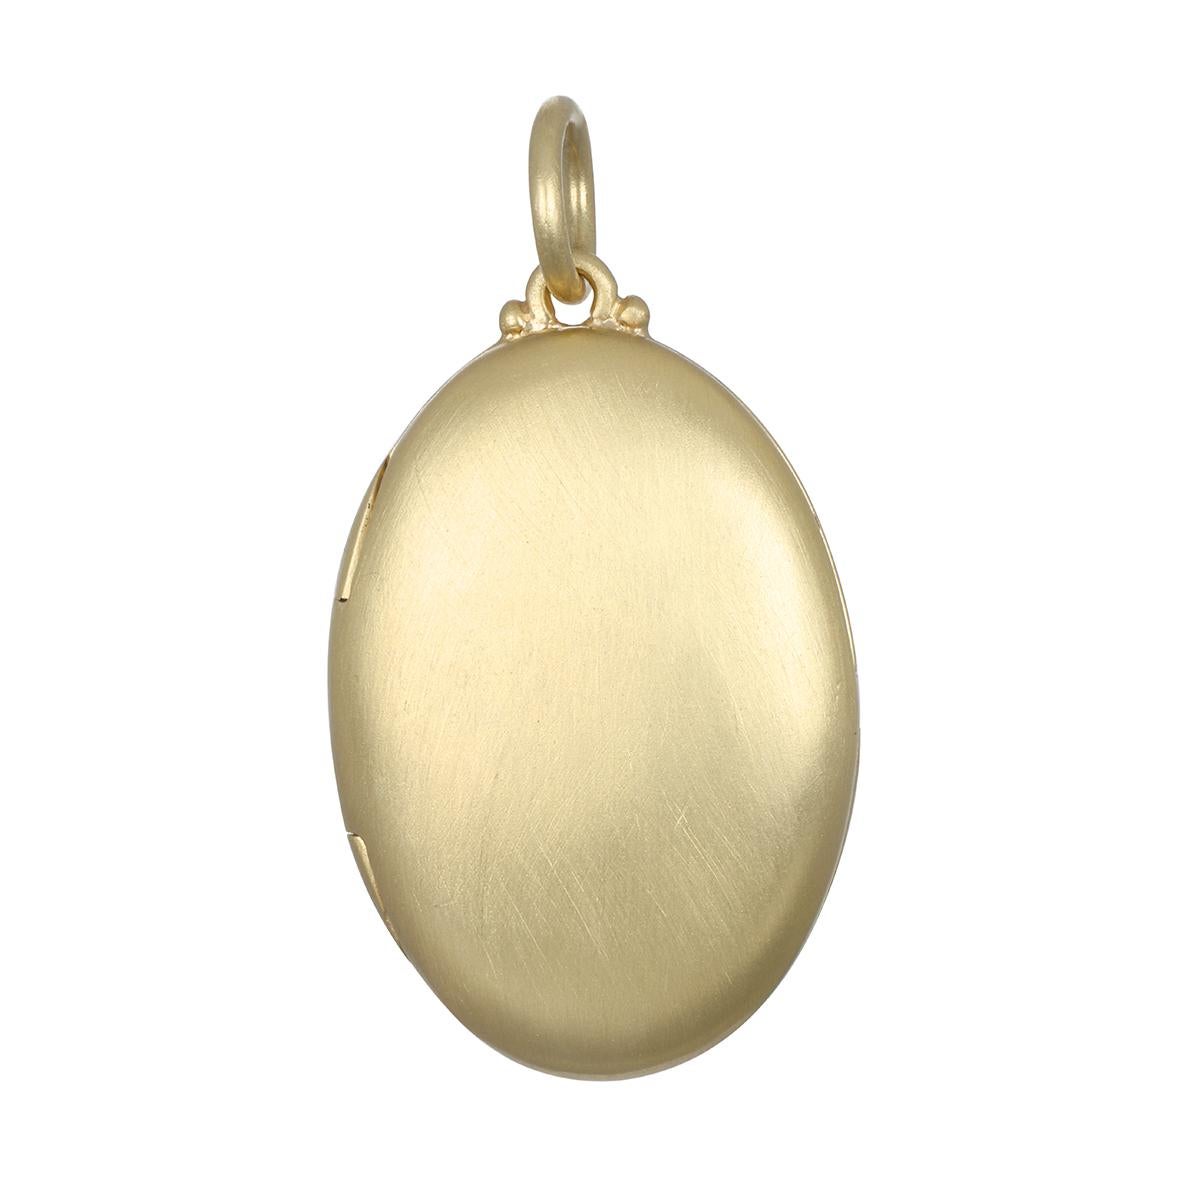 Experience luxury every day in Faye Kim's 18 Karat Gold Handmade Heavy Oval Planished XL Link Chain Link and 18 Karat Gold Large Oval Locket. The oval planished link chain with its matte finish gives it gorgeous texture and a bold, modern look while